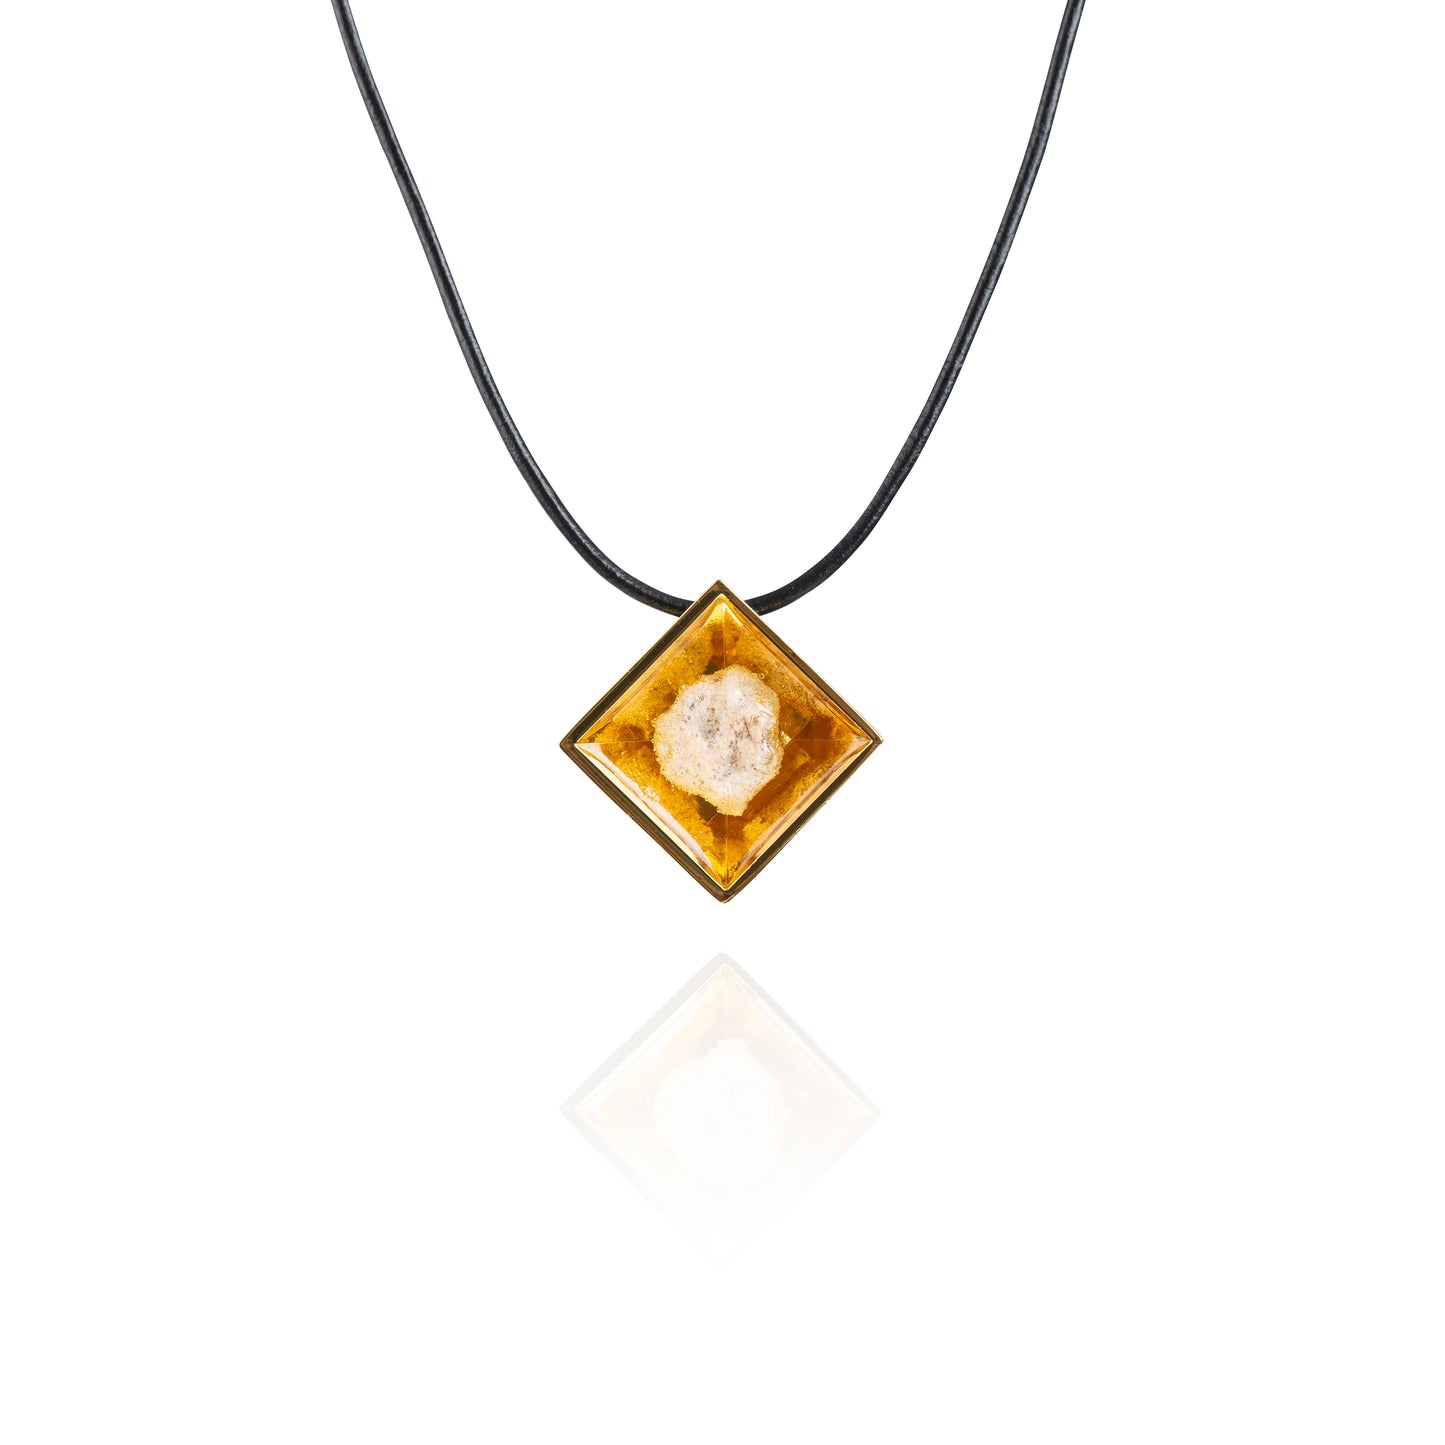 A small natural tan stone sitting in the middle of a diamond shaped metal pendant in a gold color. The pendant is hanging on a black leather necklace.